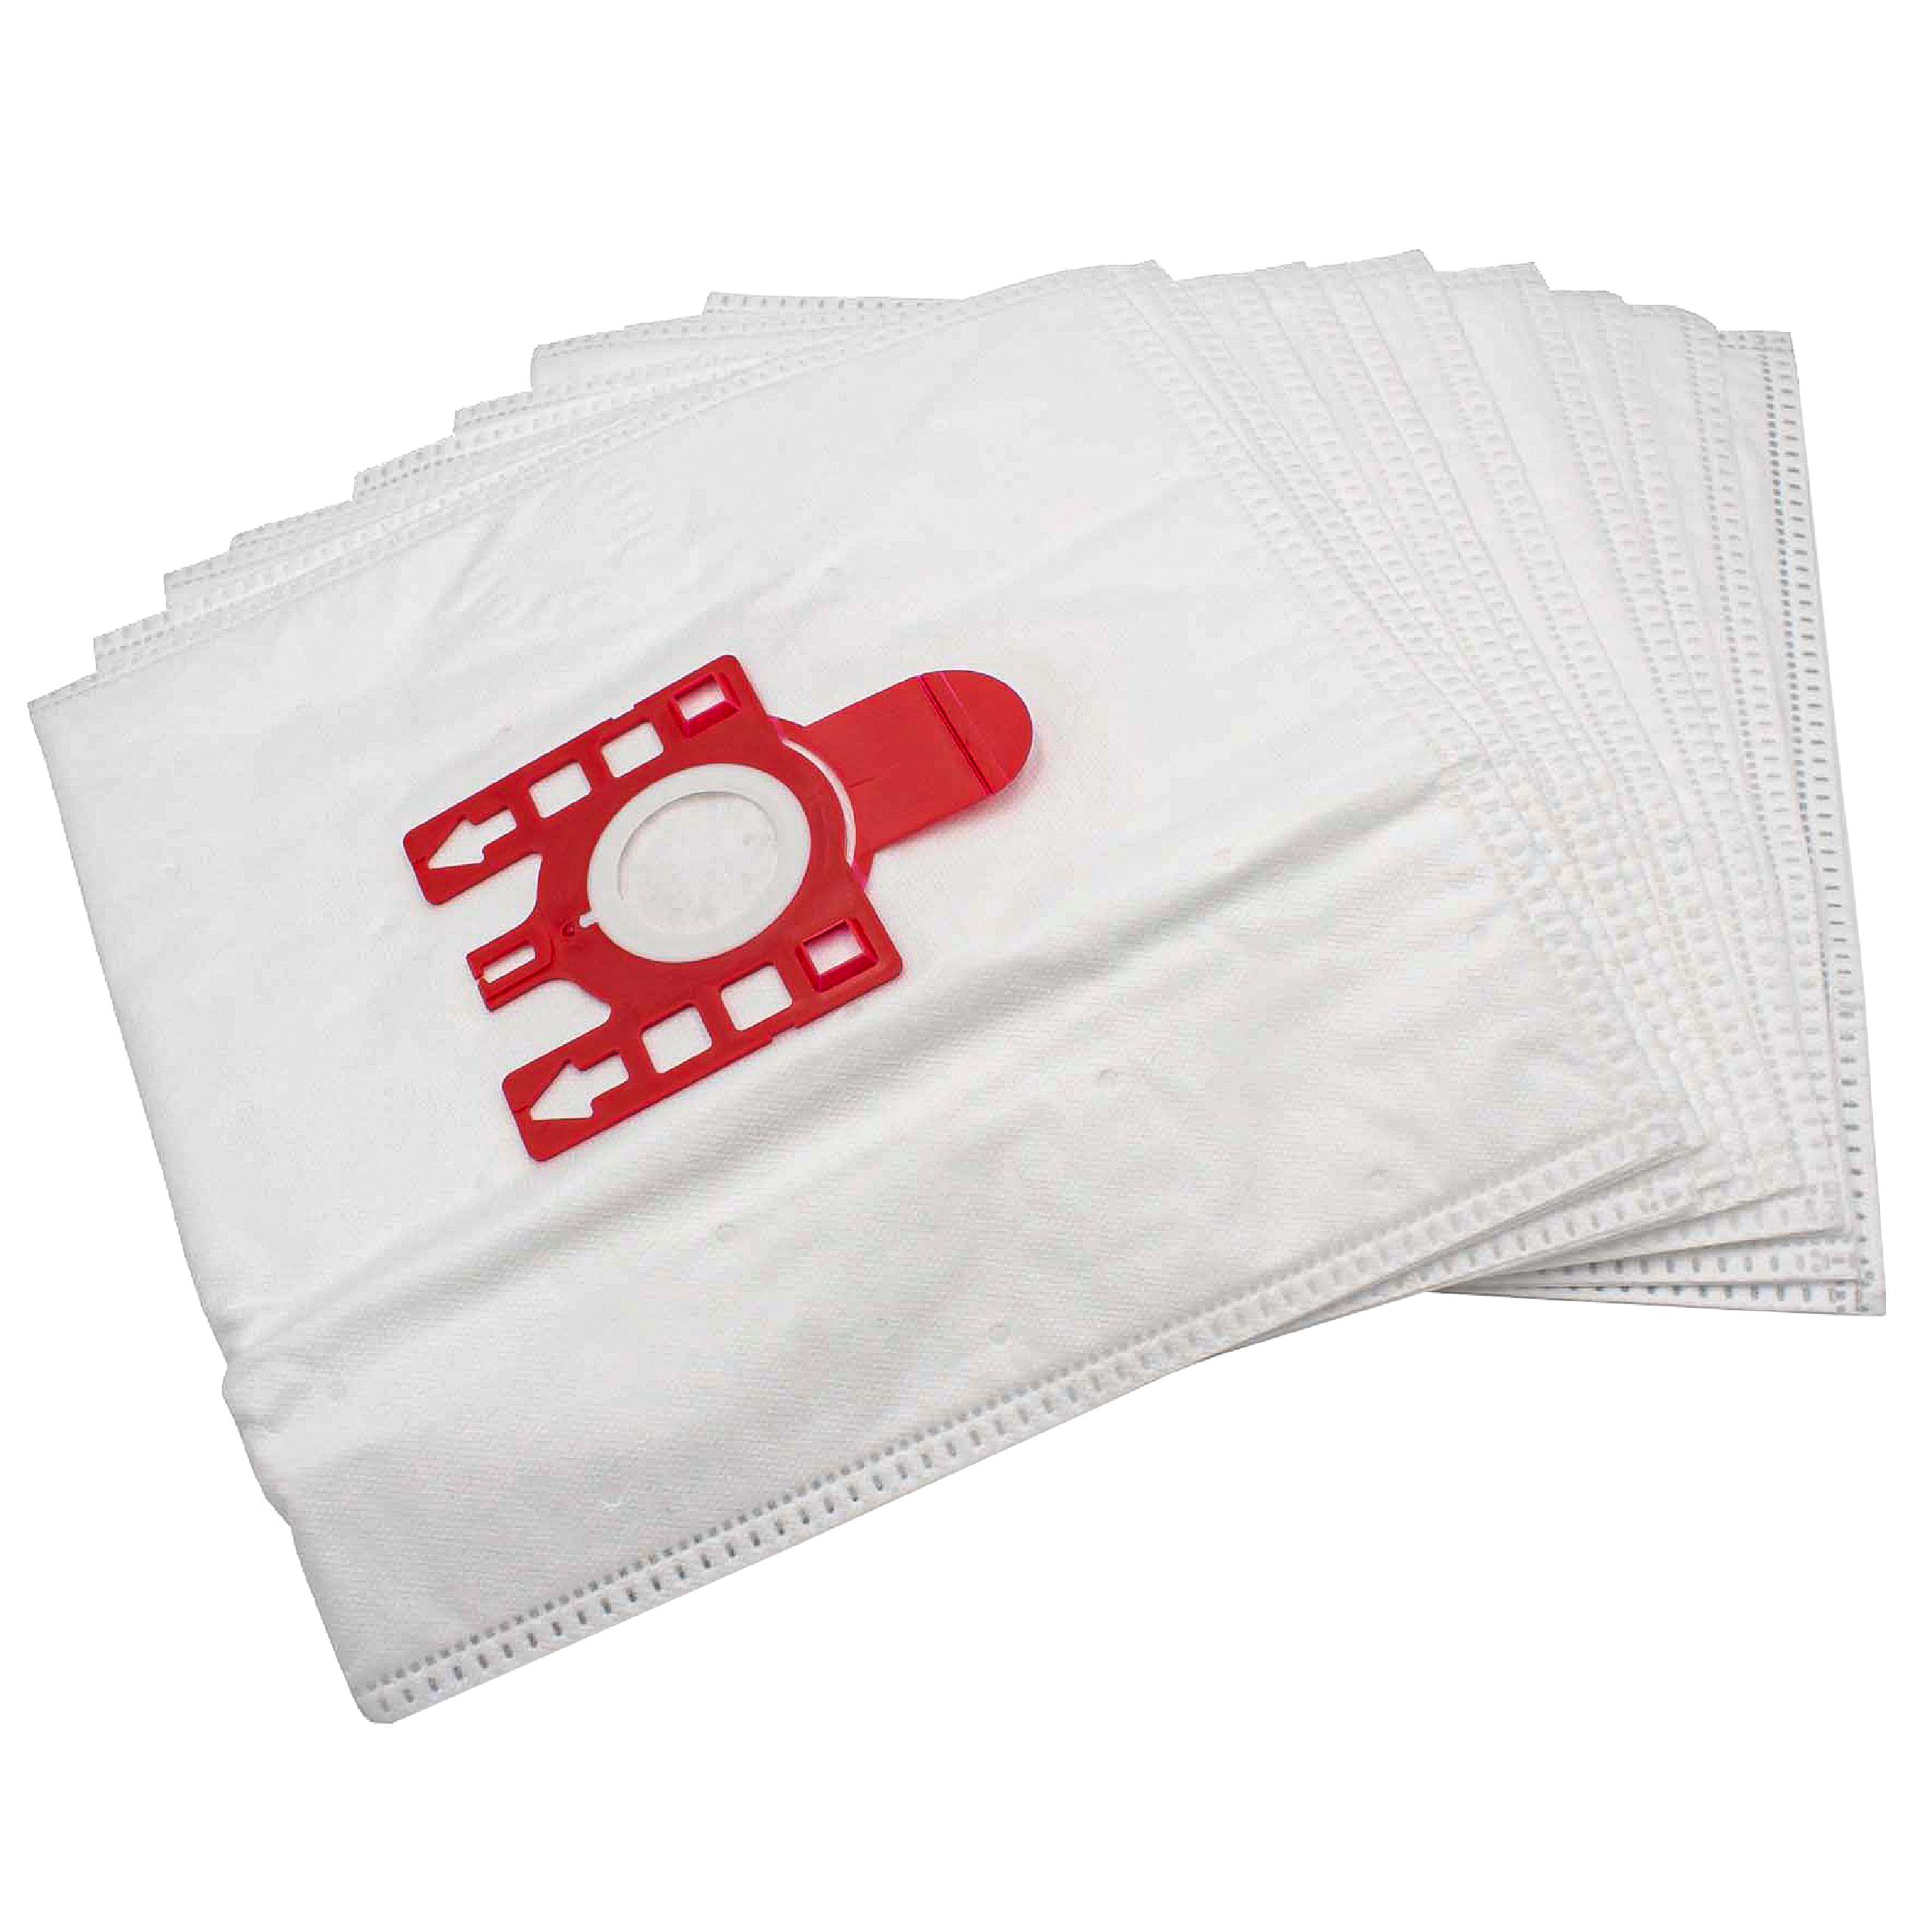 10x Vacuum Cleaner Bag suitable for H 30 Hoover Arianne H 30 - microfleece